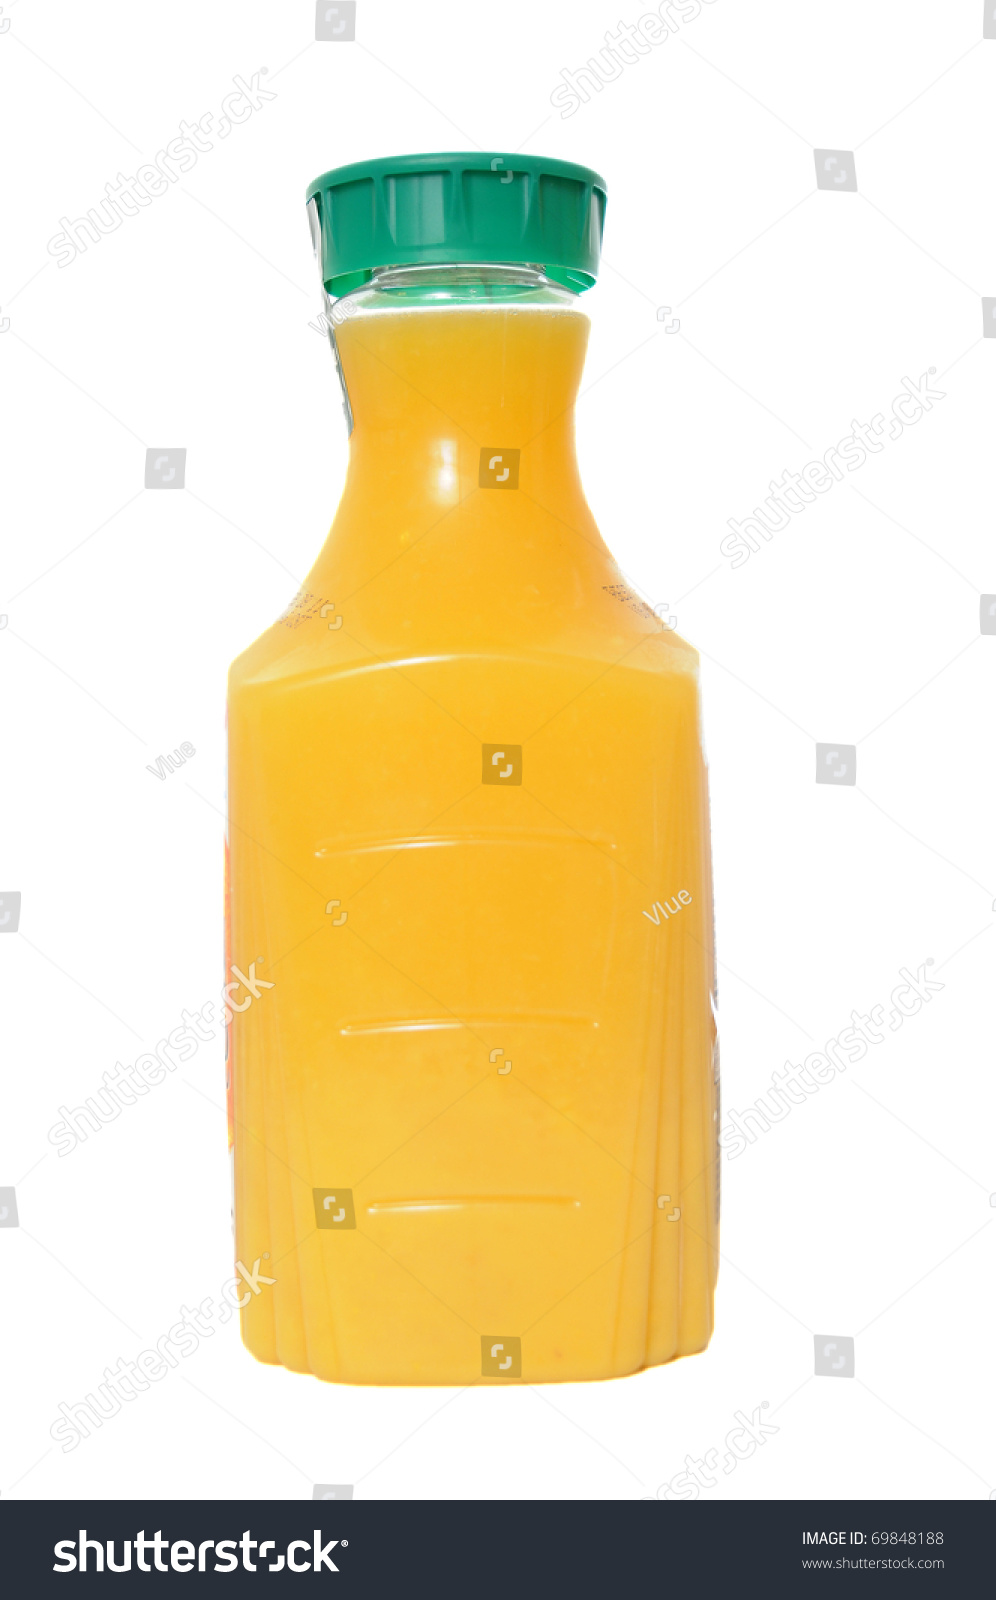 Download Orange Juice Plastic Container Jug Isolated Transportation Stock Image 69848188 Yellowimages Mockups